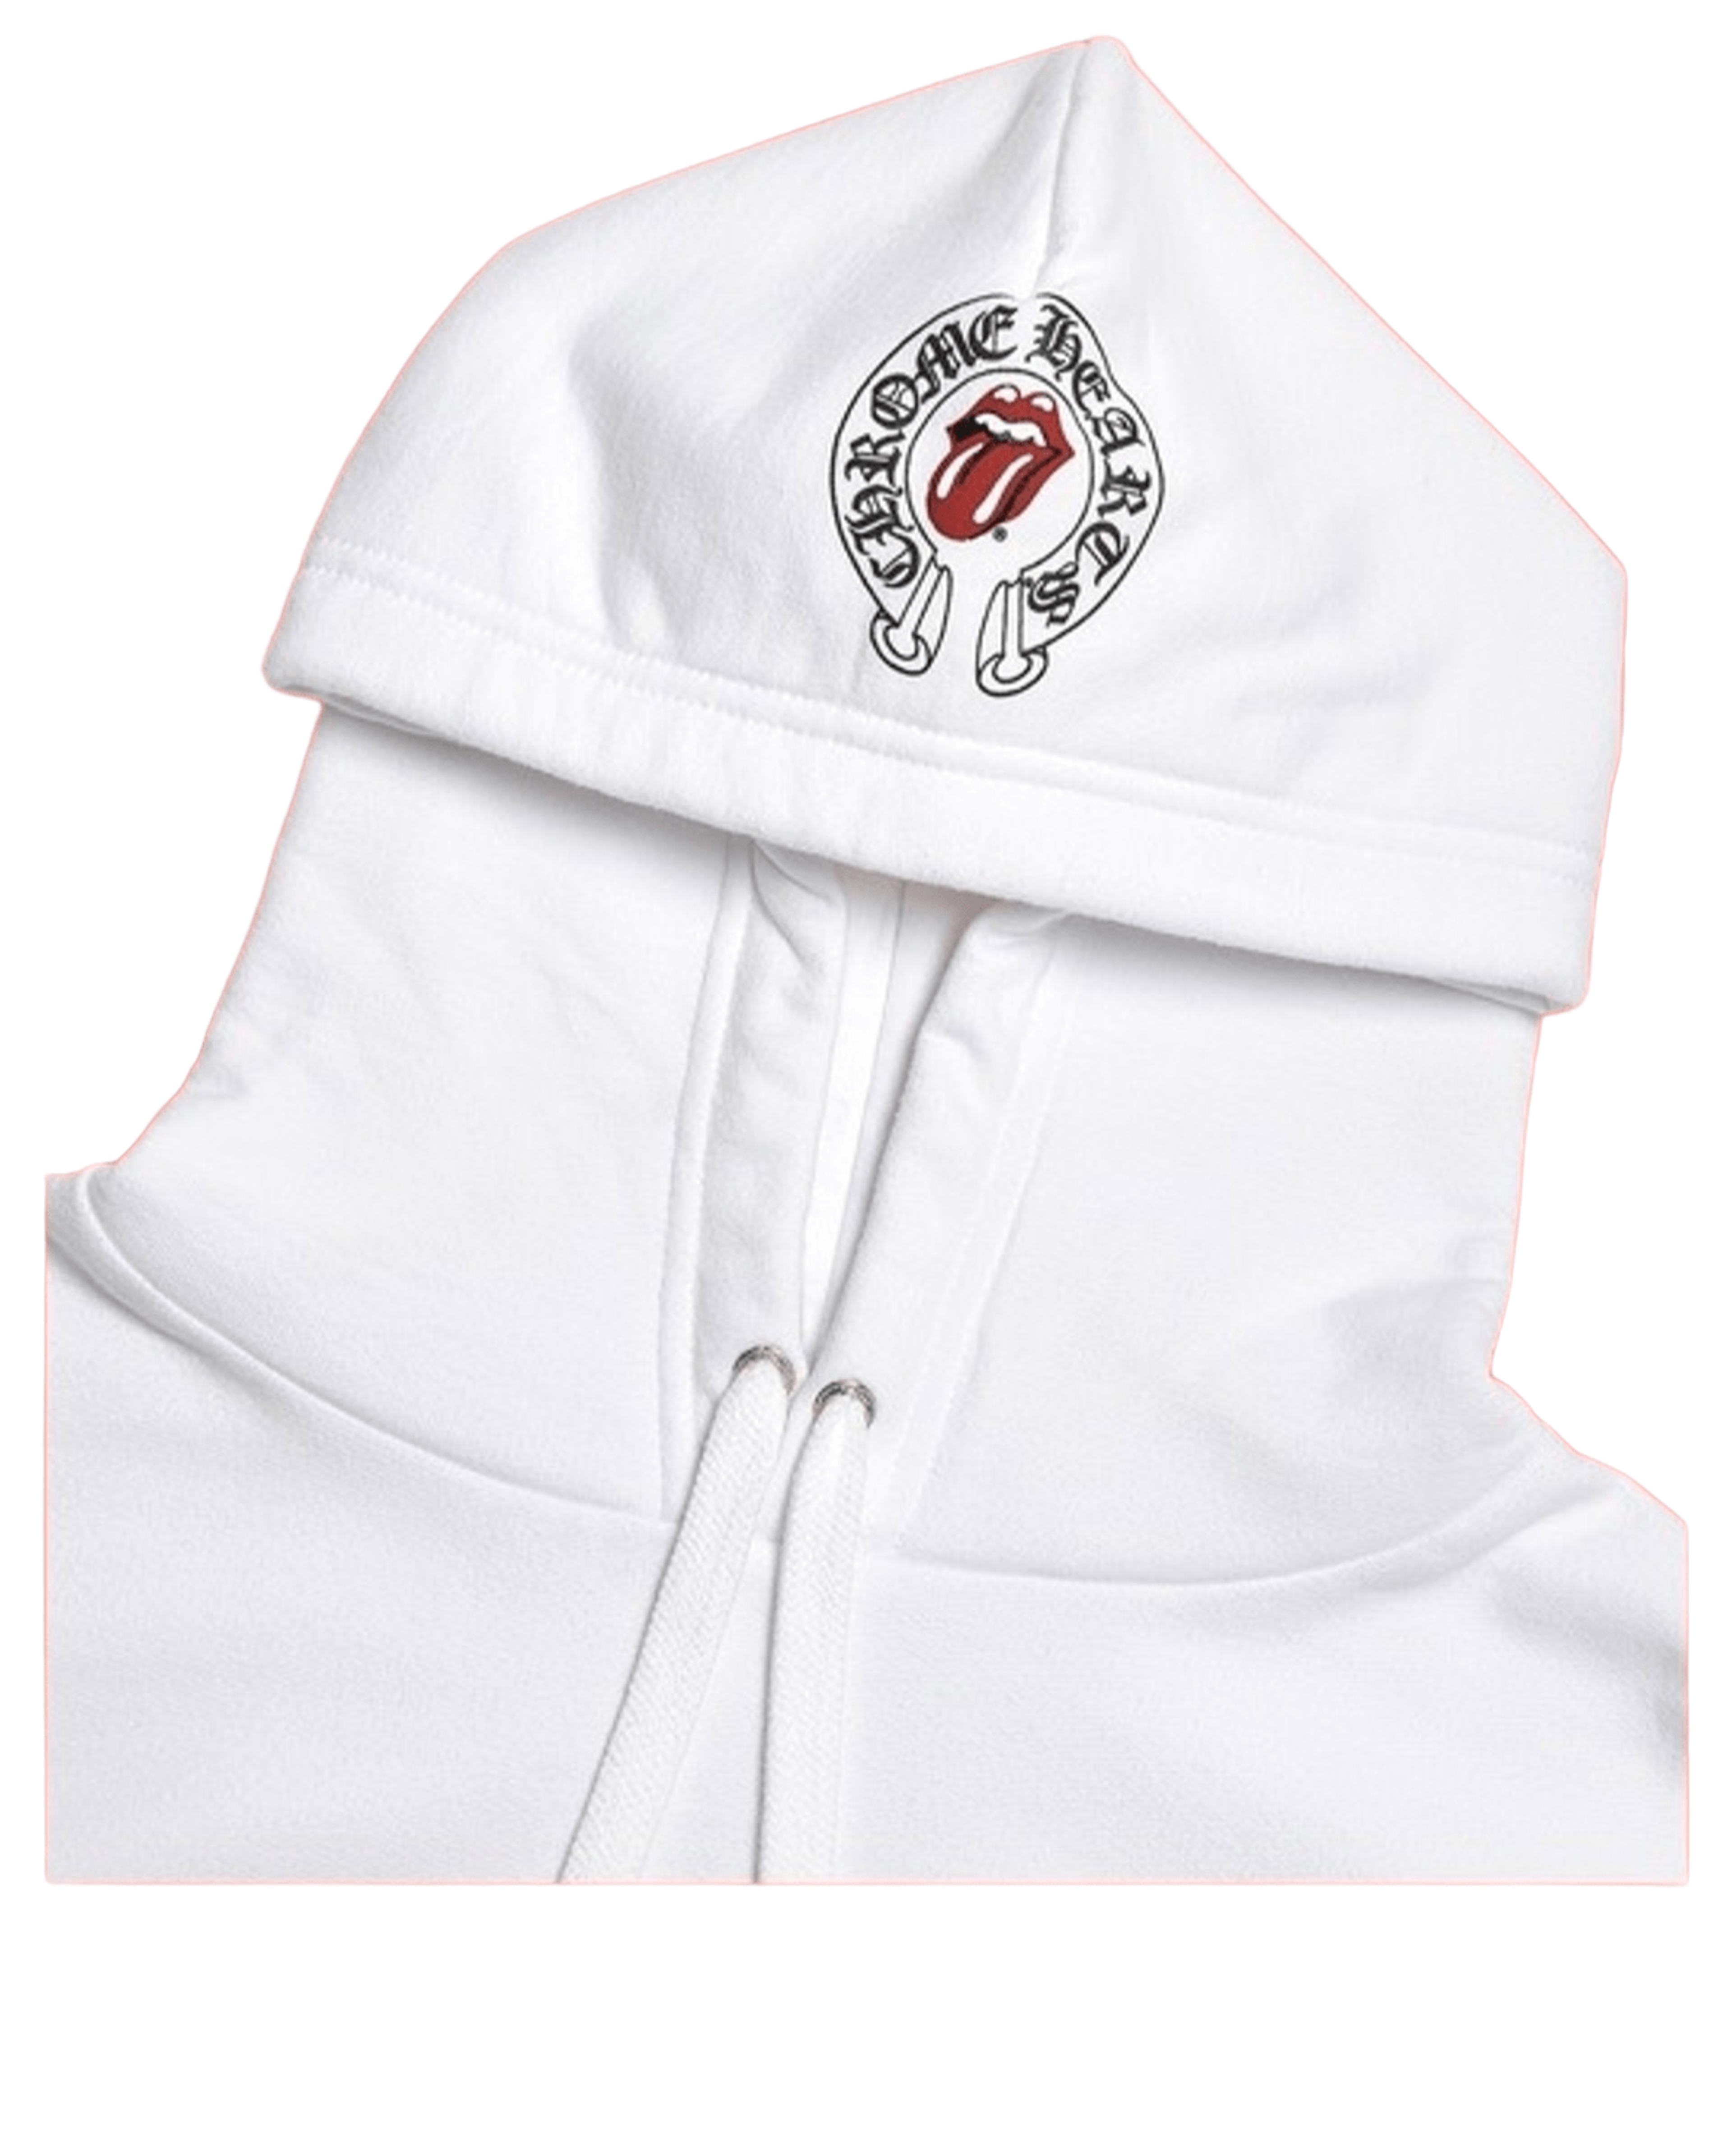 Alternate View 4 of Chrome Hearts Online Exclusive Rolling Stones Hooded Sweatshirt 